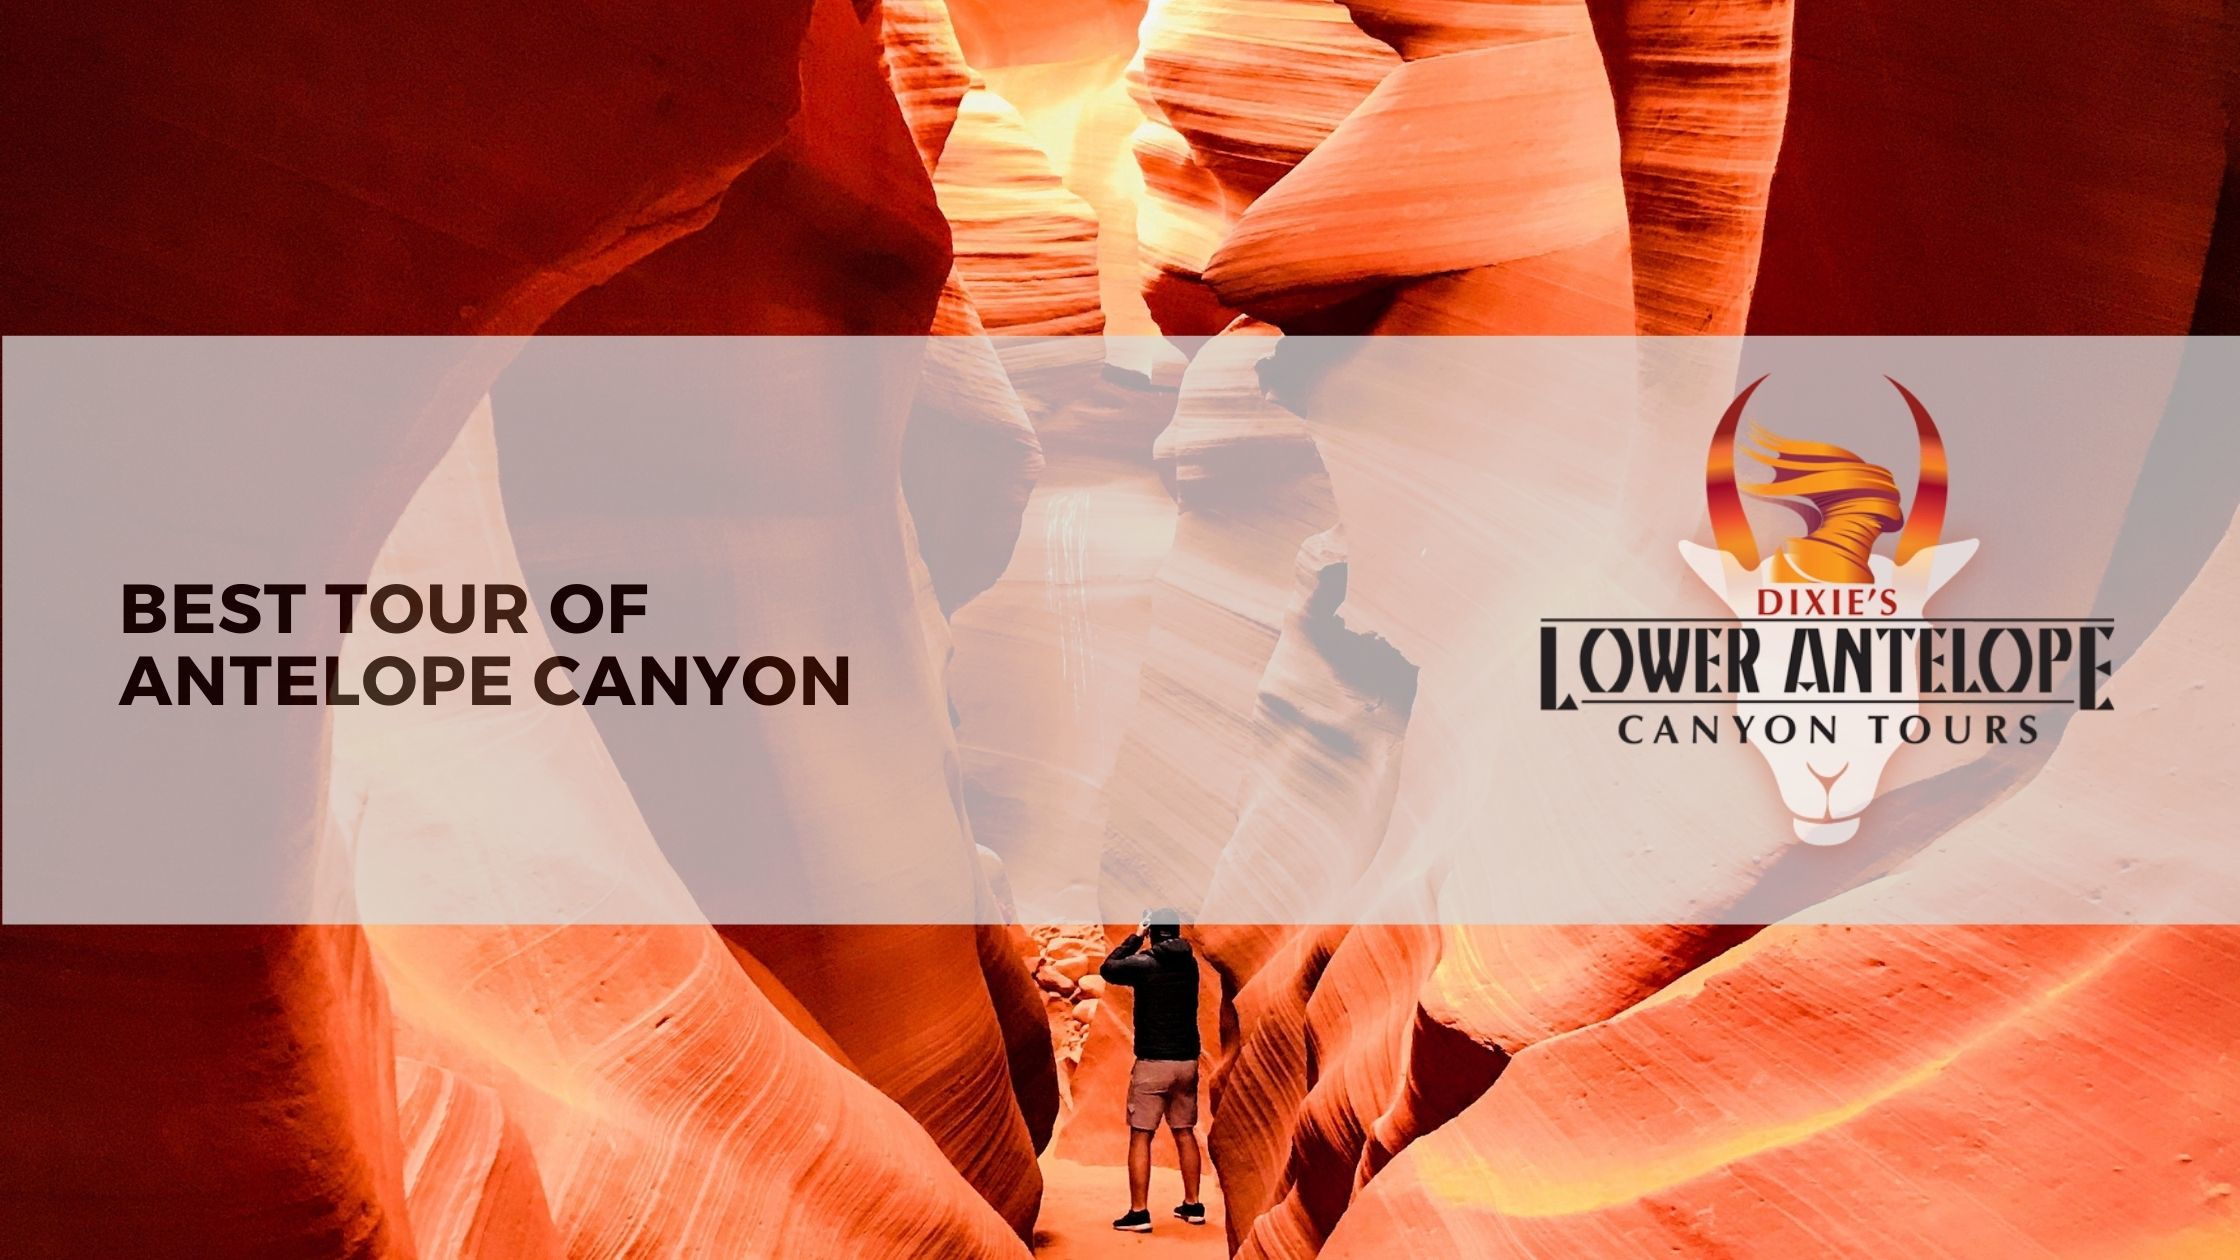 Best tour of Antelope Canyon